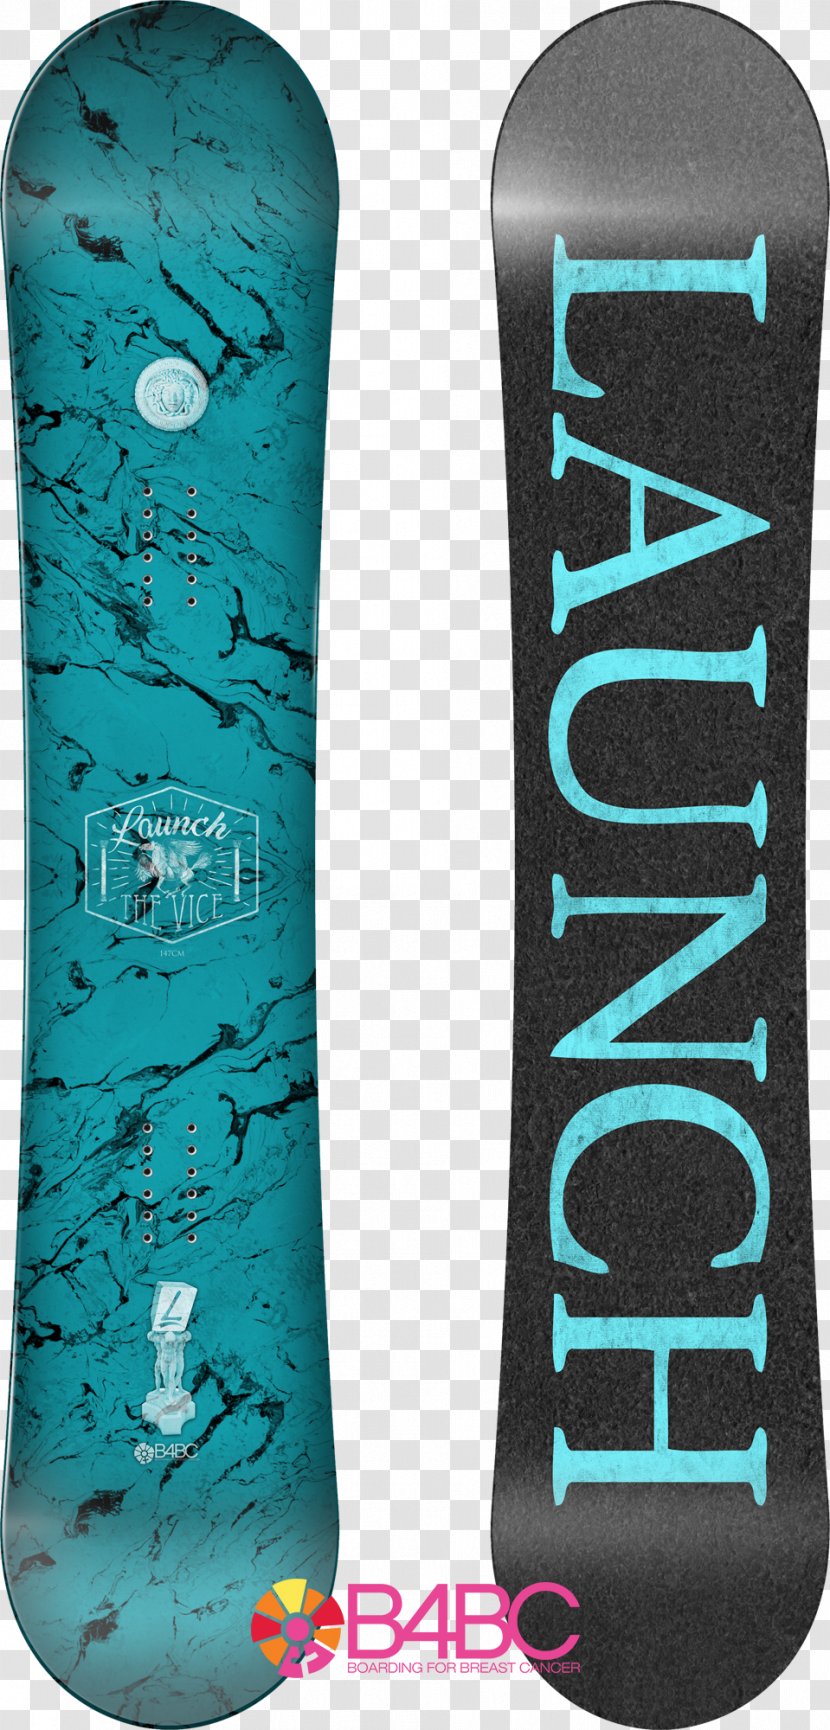 Snowboard Product Design Vice Media Turquoise - Rocket Launch Transparent PNG